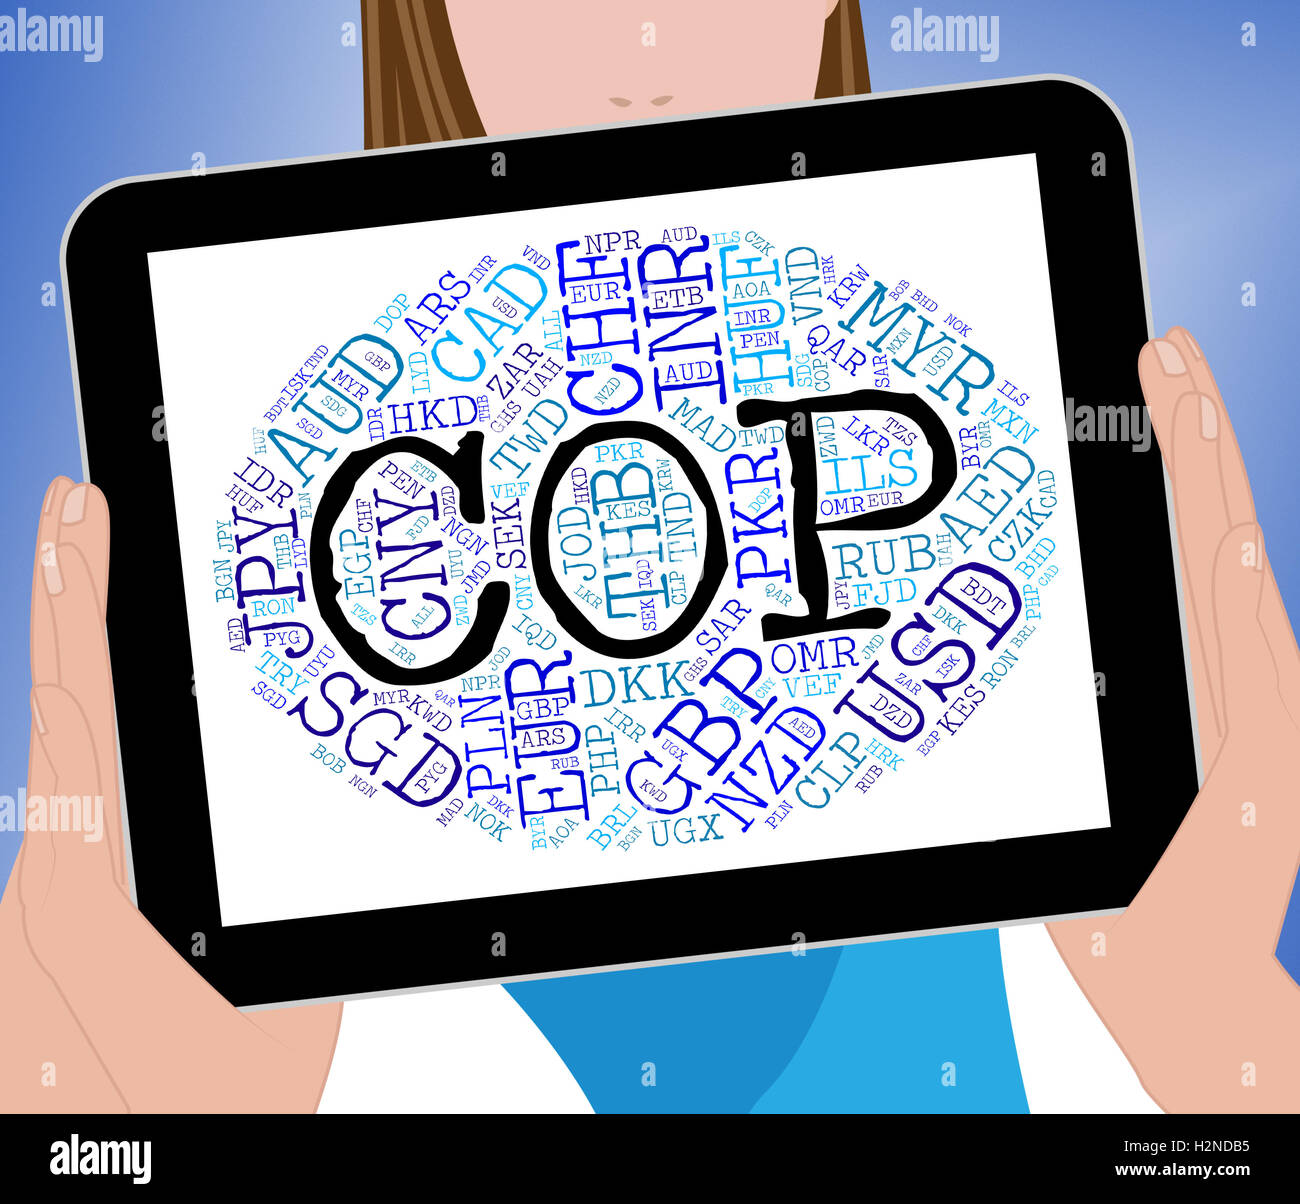 Cop Currency Meaning Forex Trading And Wordcloud Stock Photo - Alamy